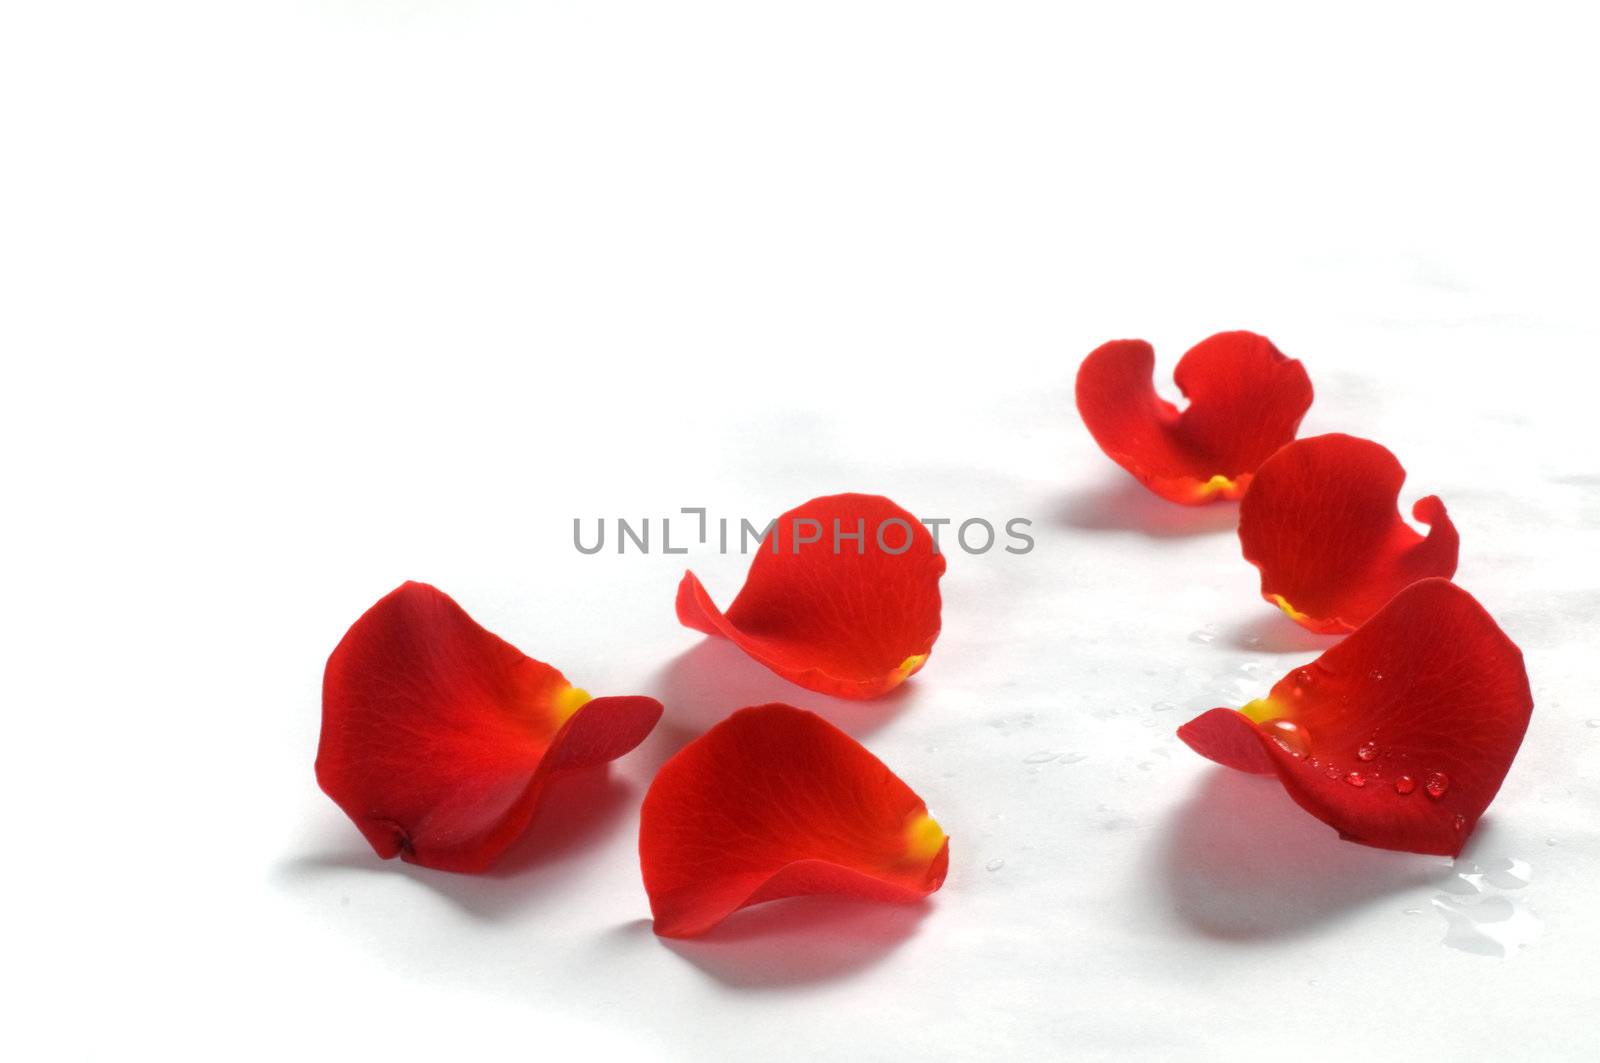 Fresh rose petals with water droplets on white background